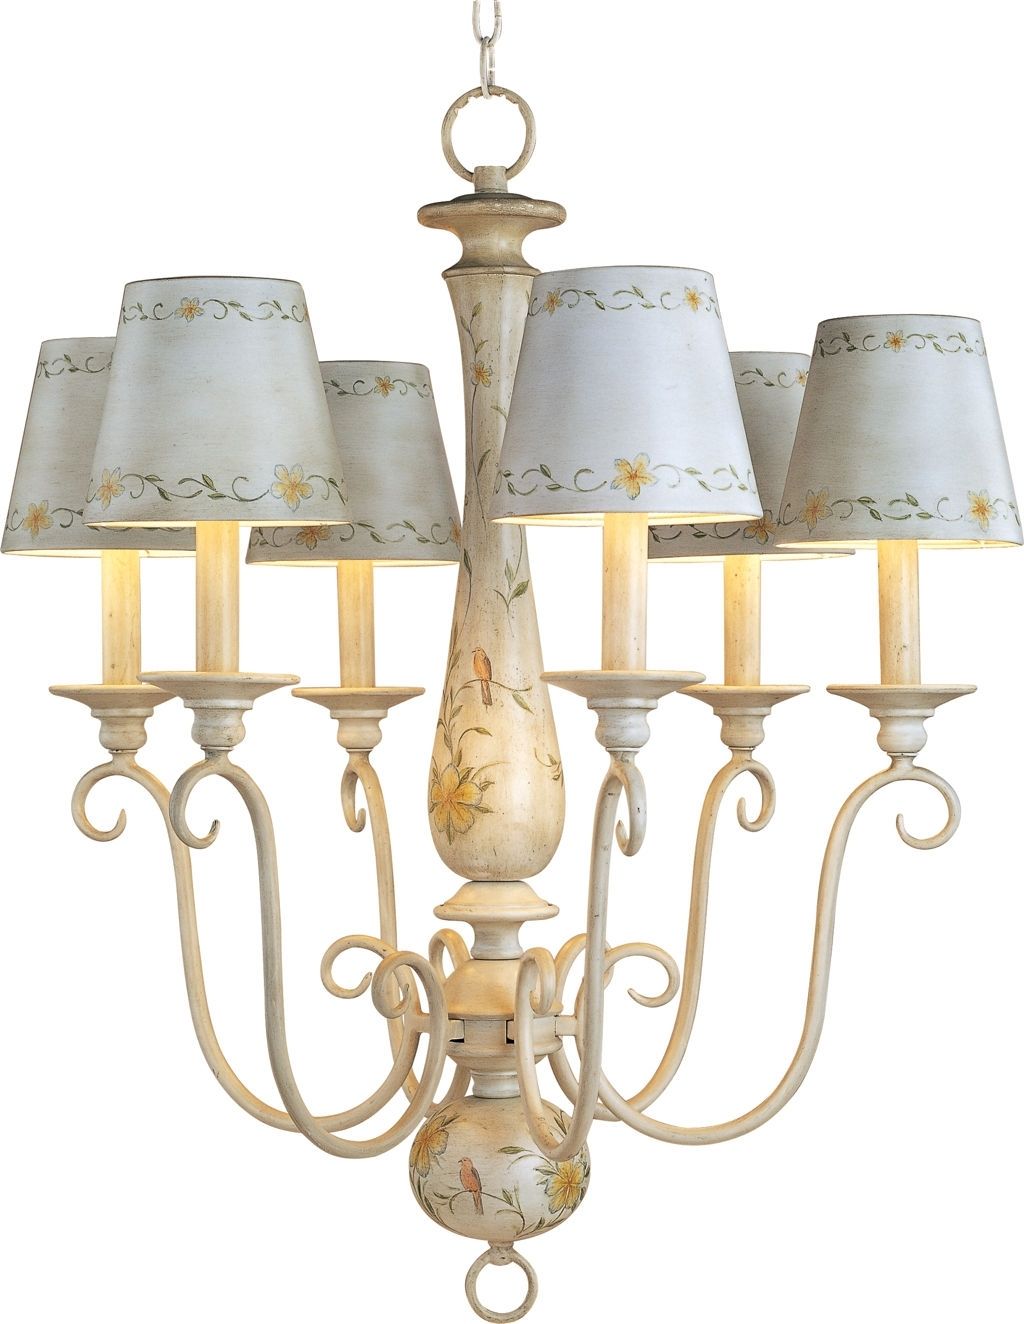 2018 Antique French Country Mini Chandelier With Ceramic Lamp Shades And With French Country Chandeliers (View 10 of 15)